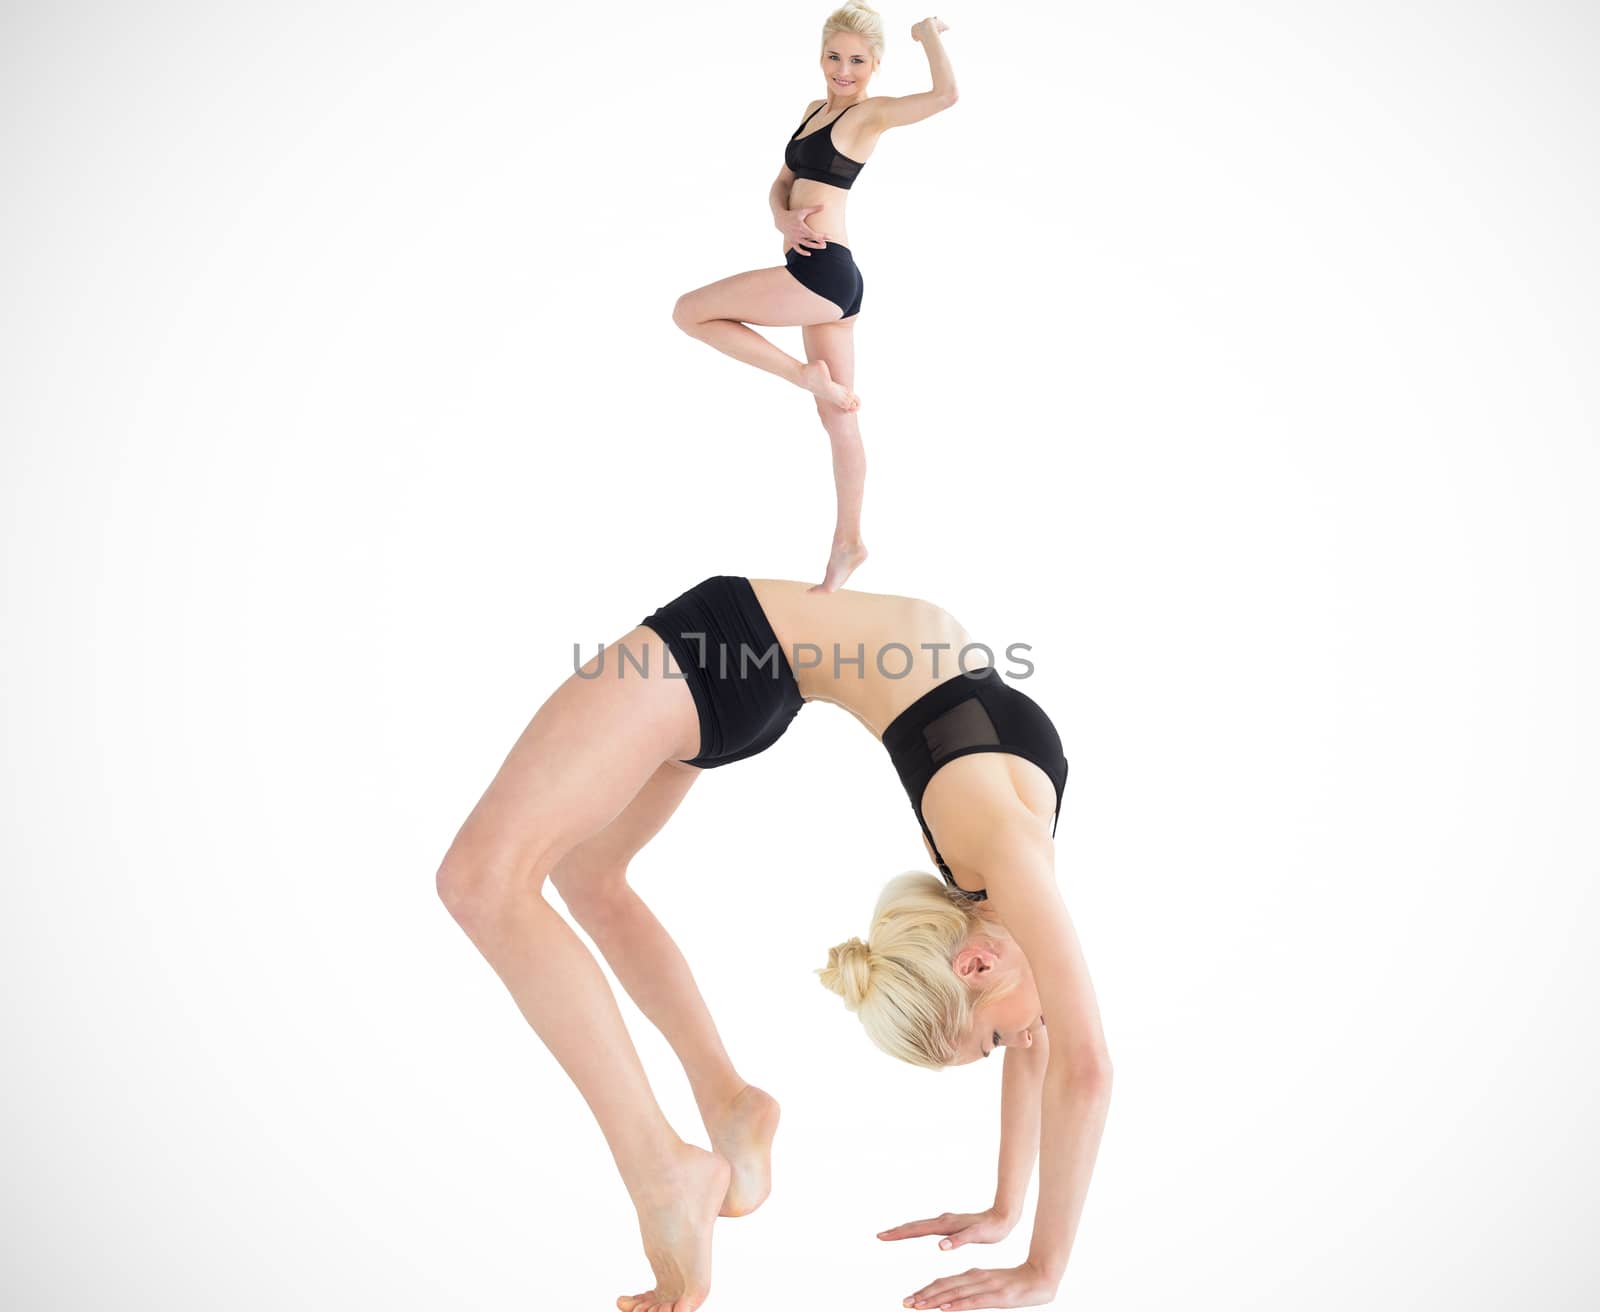 Composite image of side view of a fit young woman doing the wheel pose by Wavebreakmedia